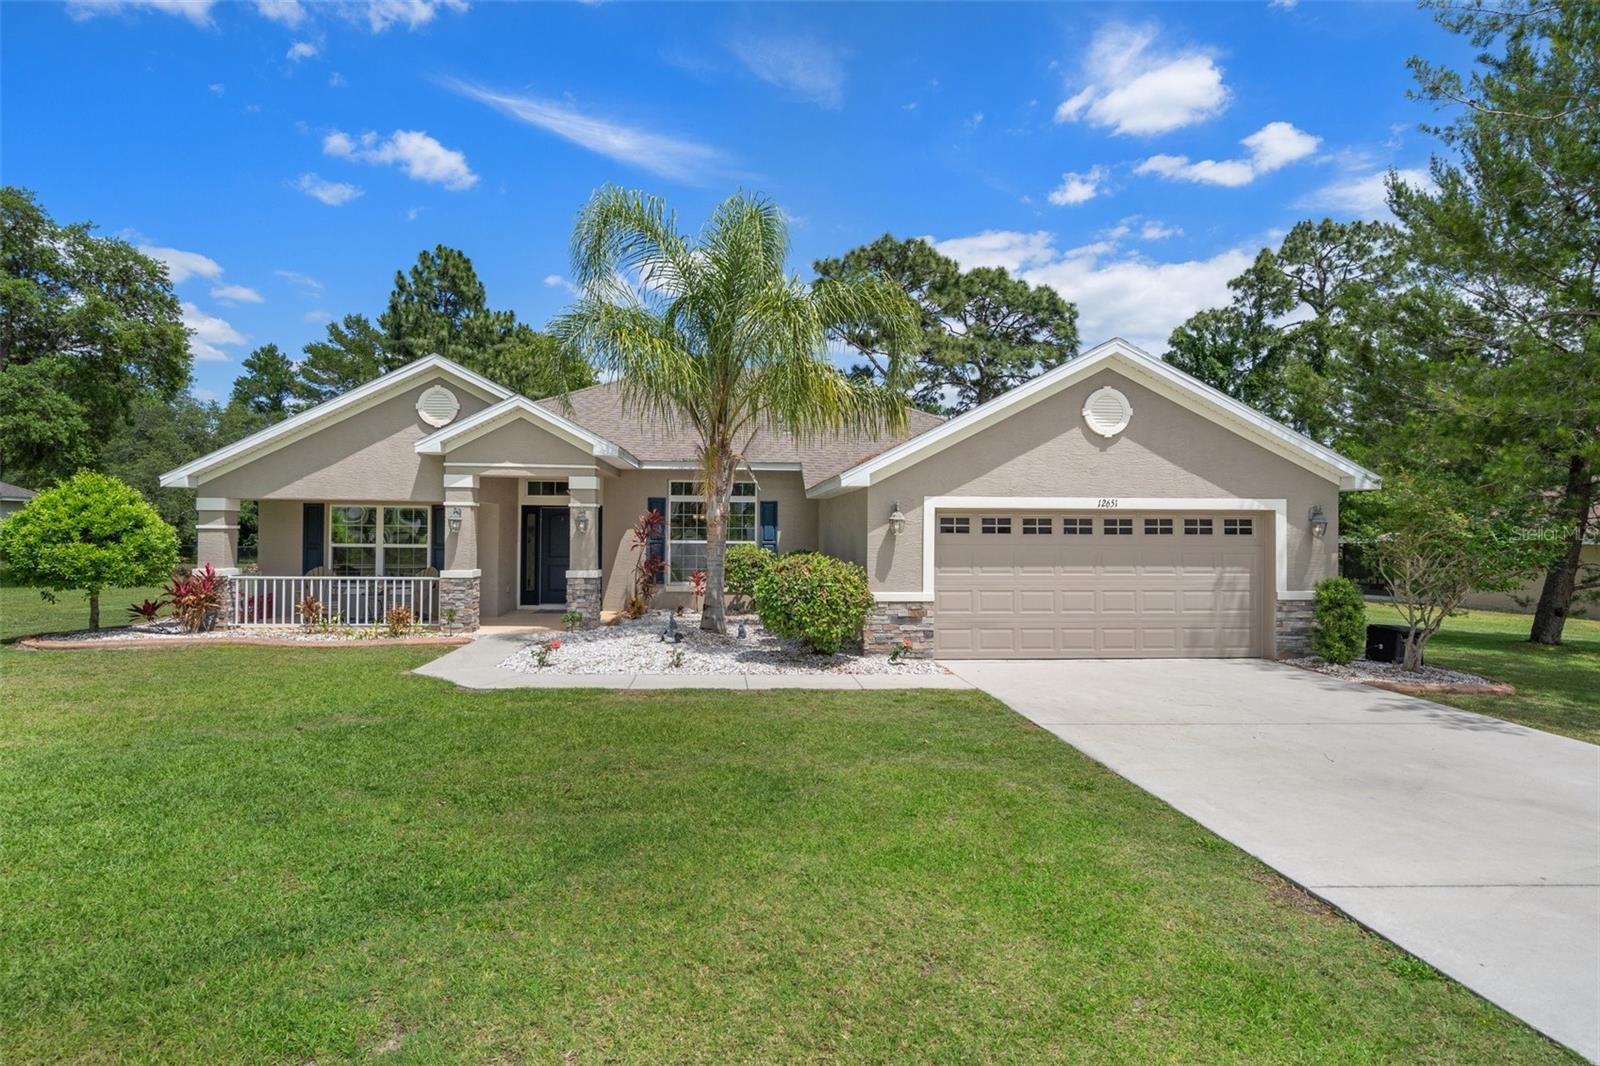 Photo one of 12651 Wind Chime Ct Spring Hill FL 34609 | MLS W7864039